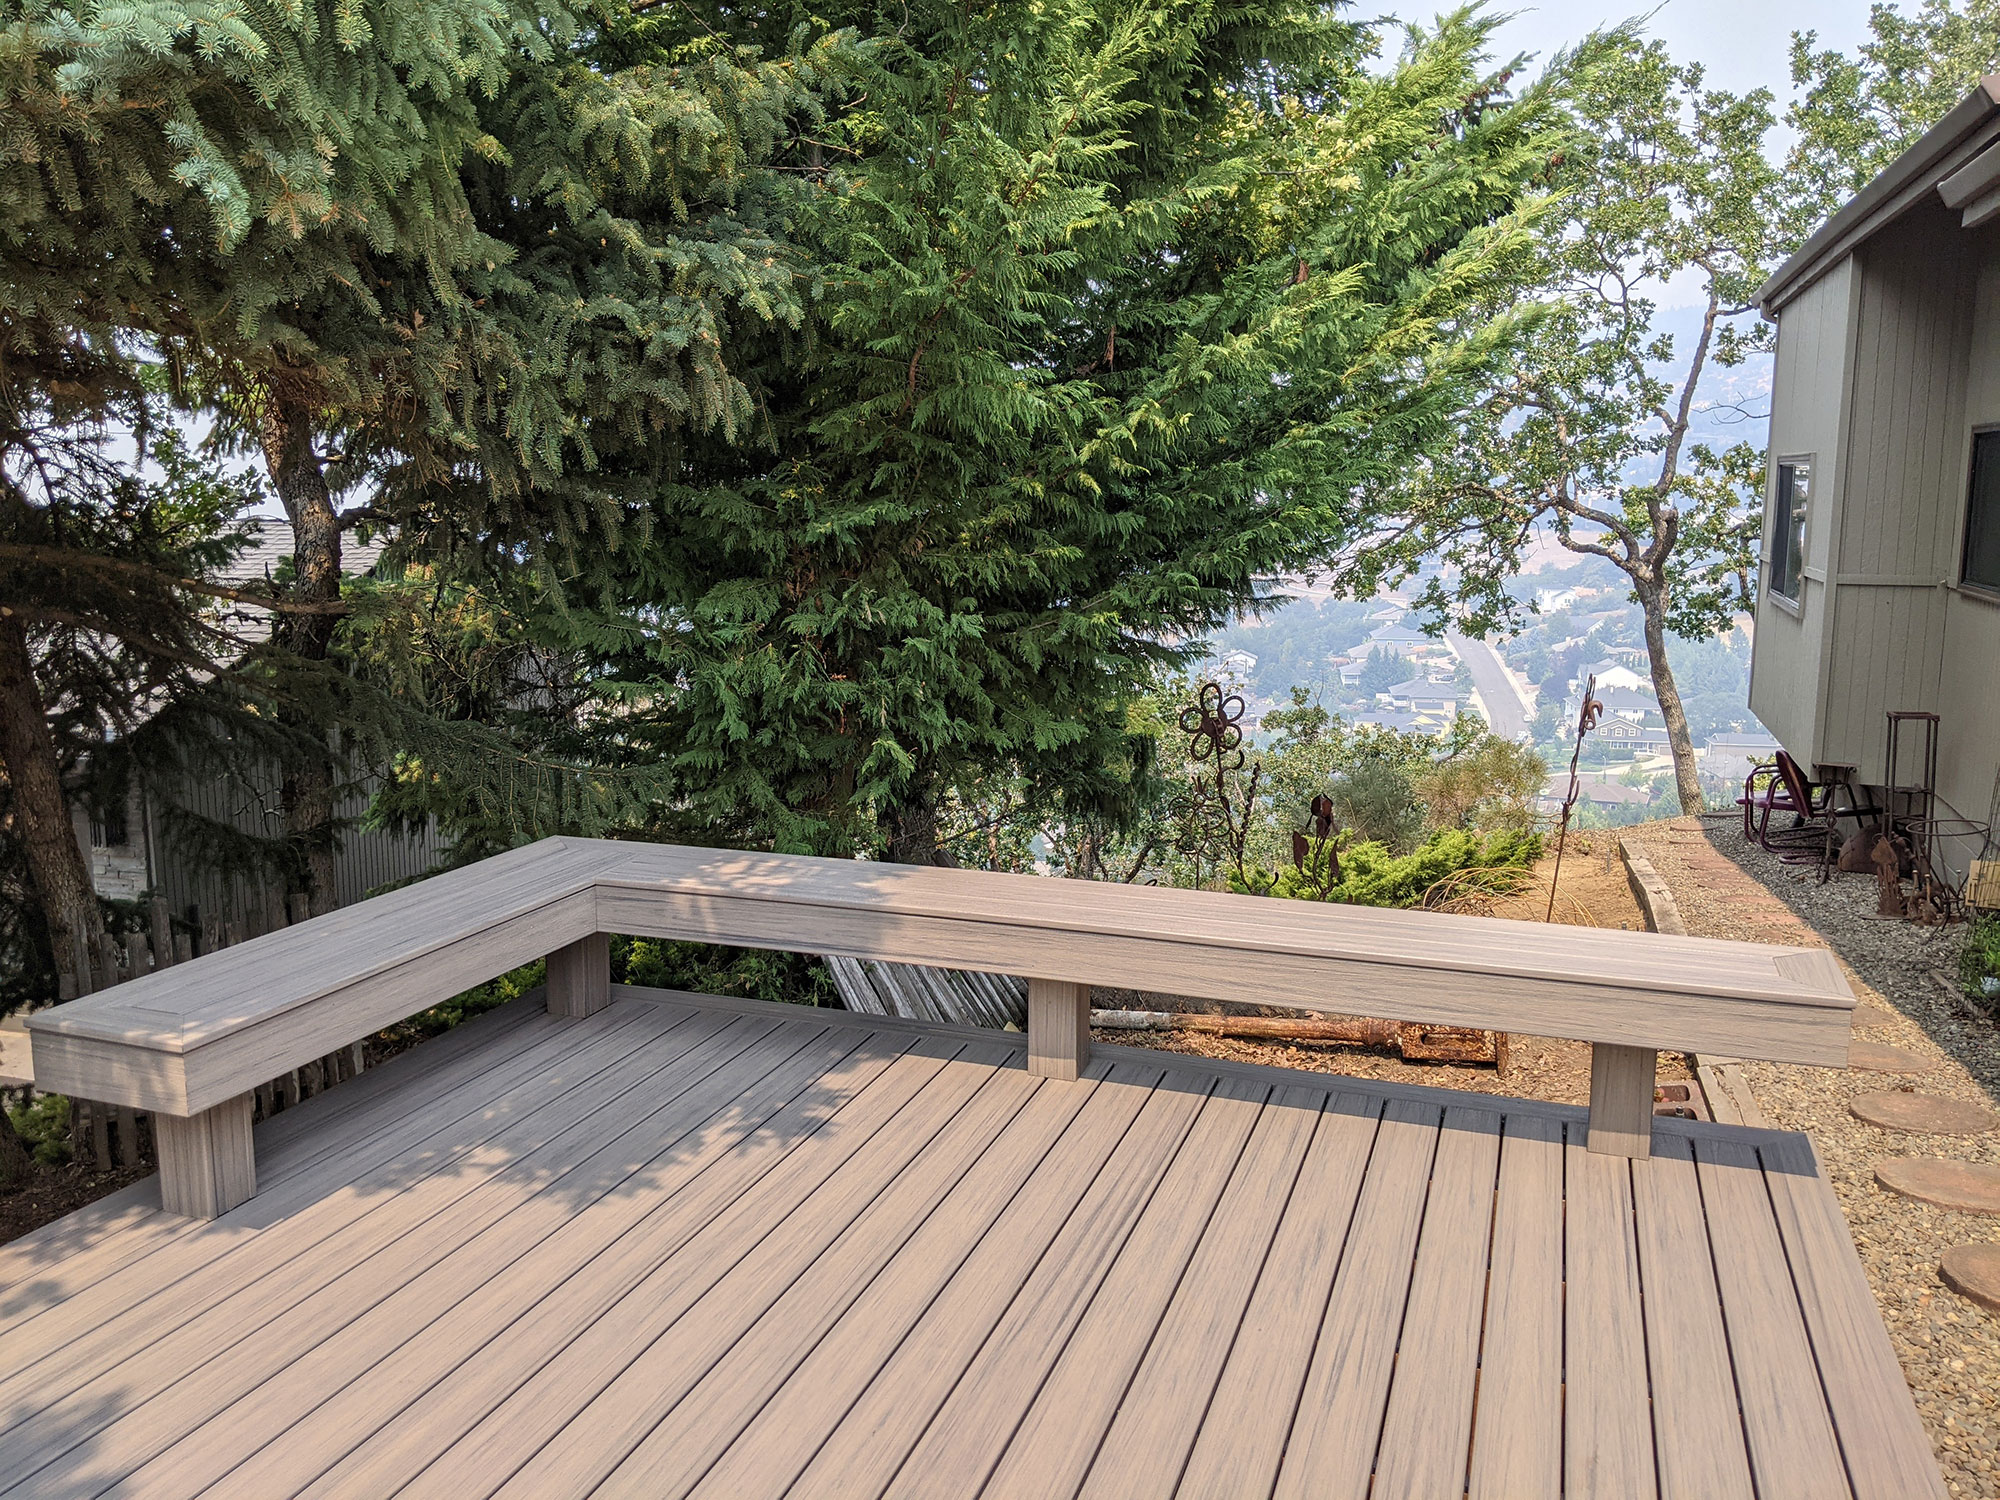 Deck built on hillside with bench railing